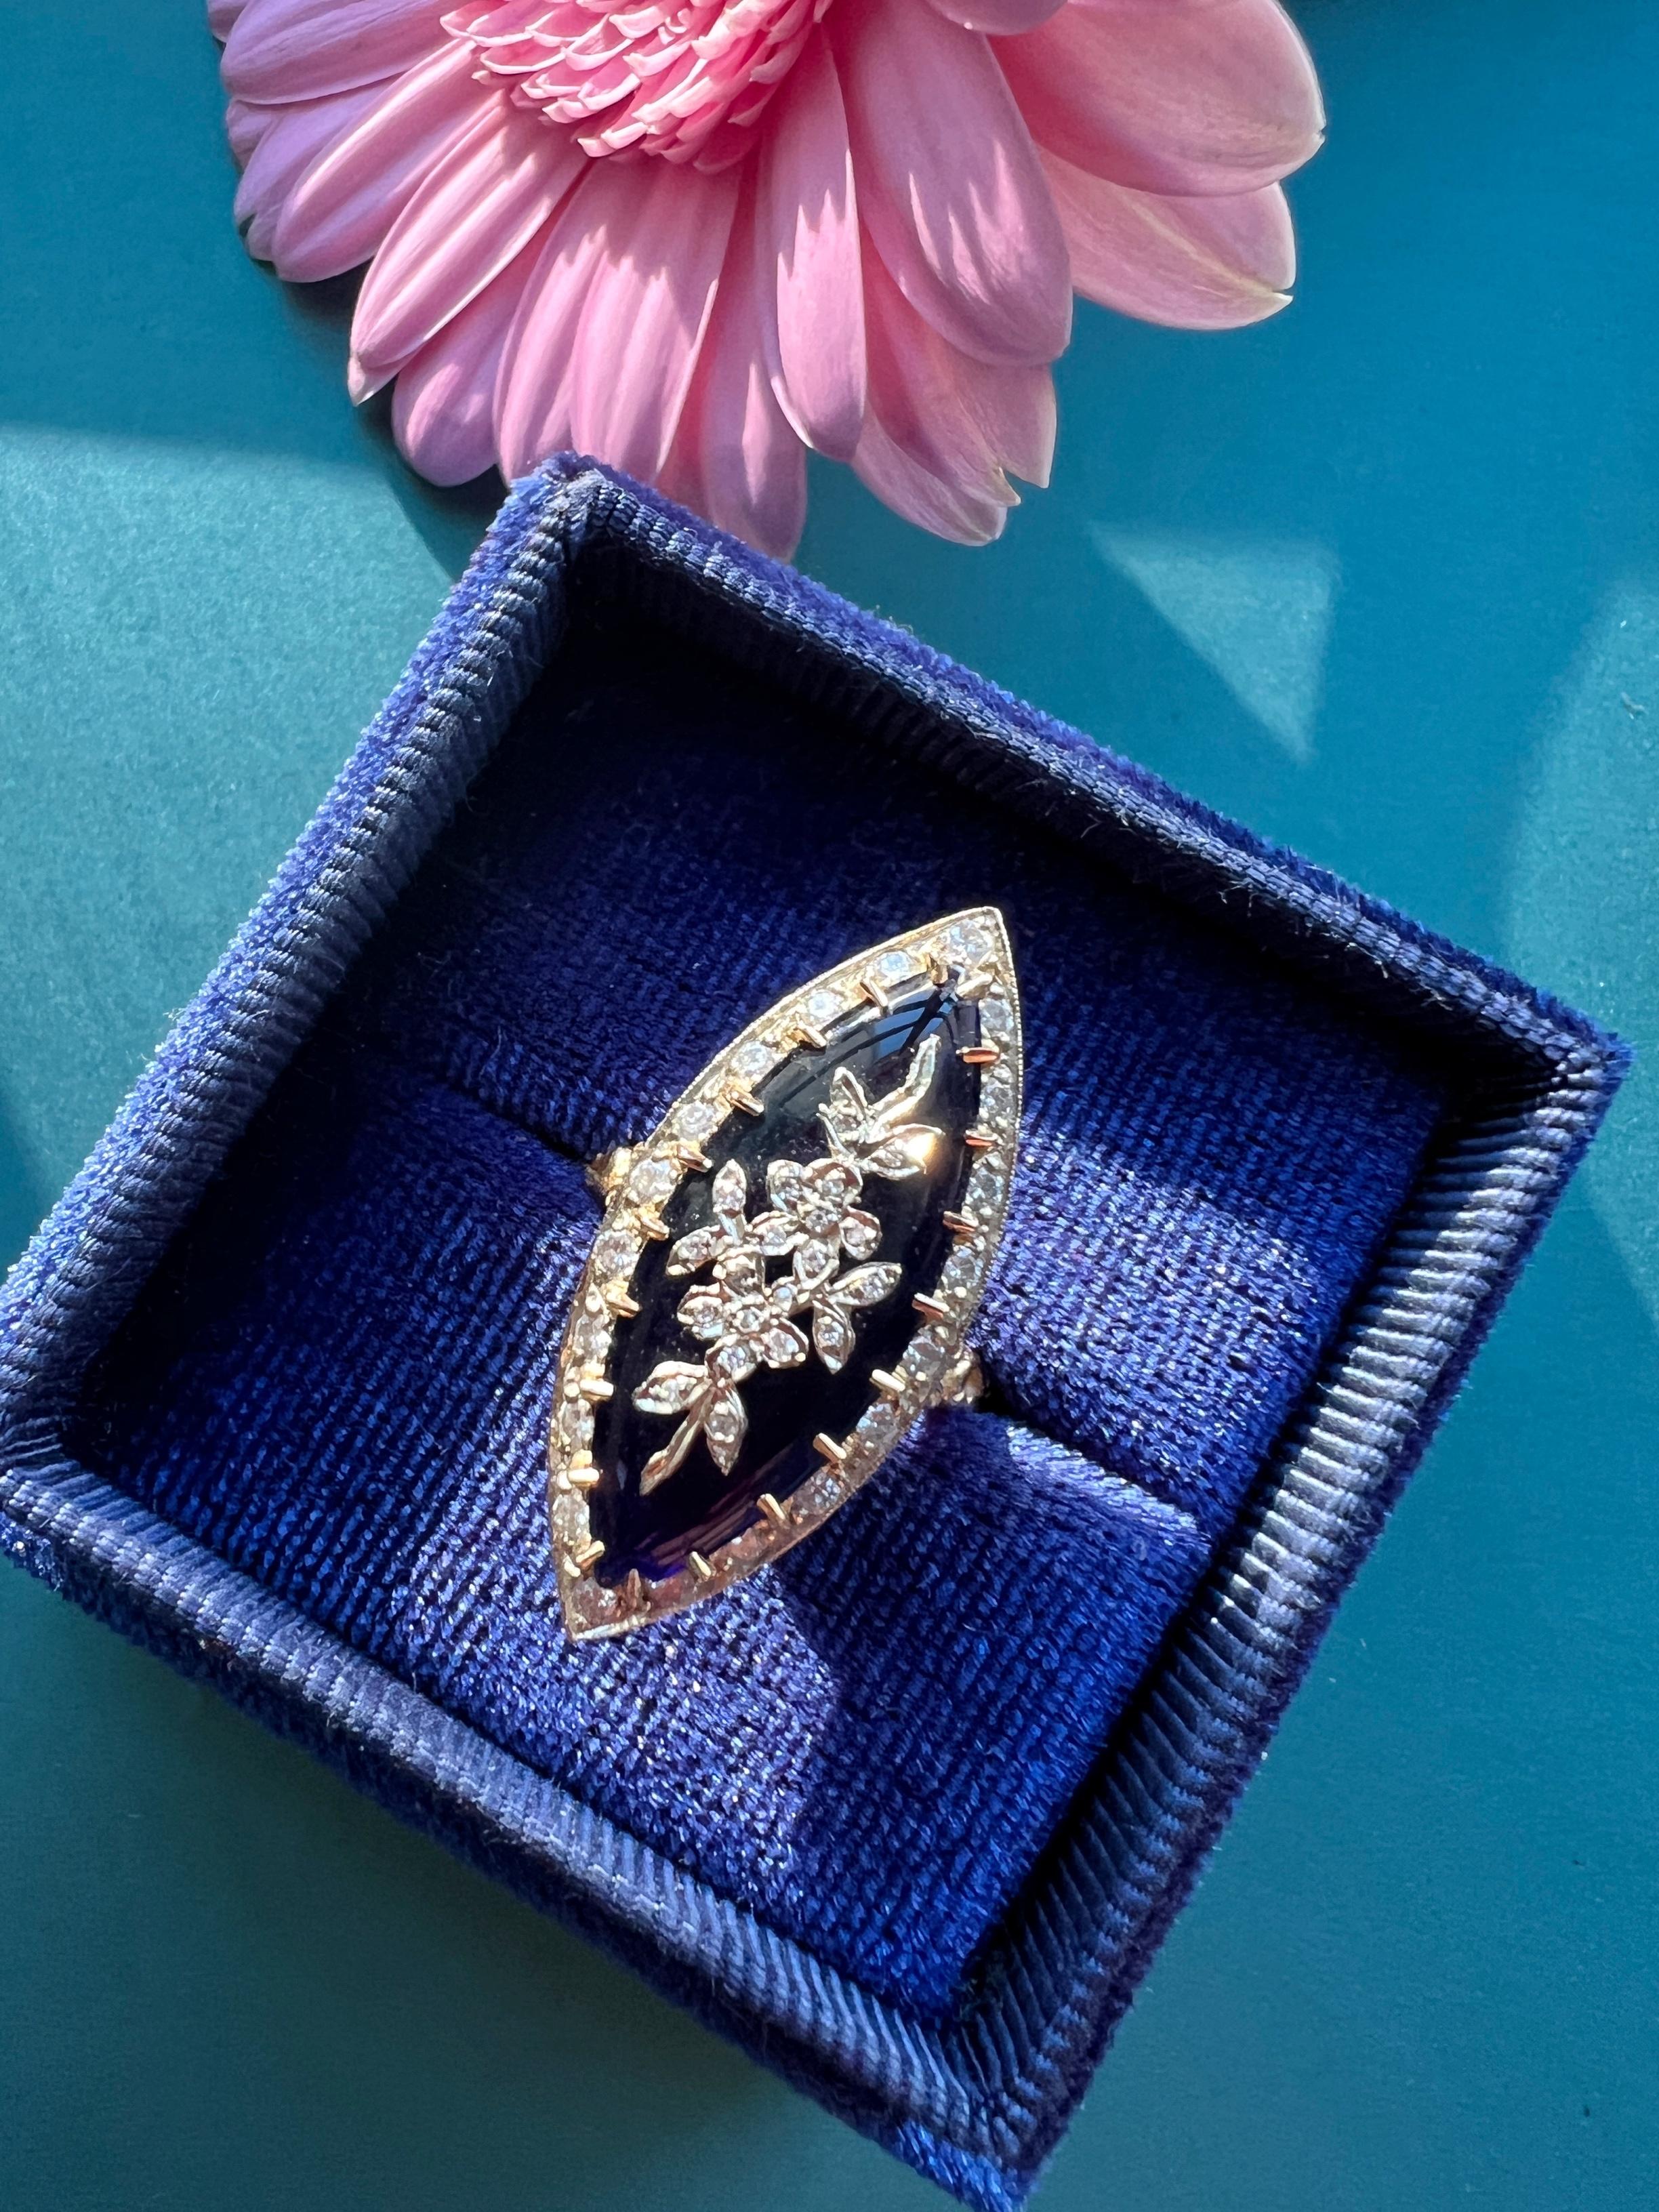 For sale a beautiful and important 18K gold marquise ring, featuring sparkling diamond flowers on a royal blue color glass cabochon panel. The central panel is prong set and is surrounded by 20 dazzling old cut diamonds. The head of the ring